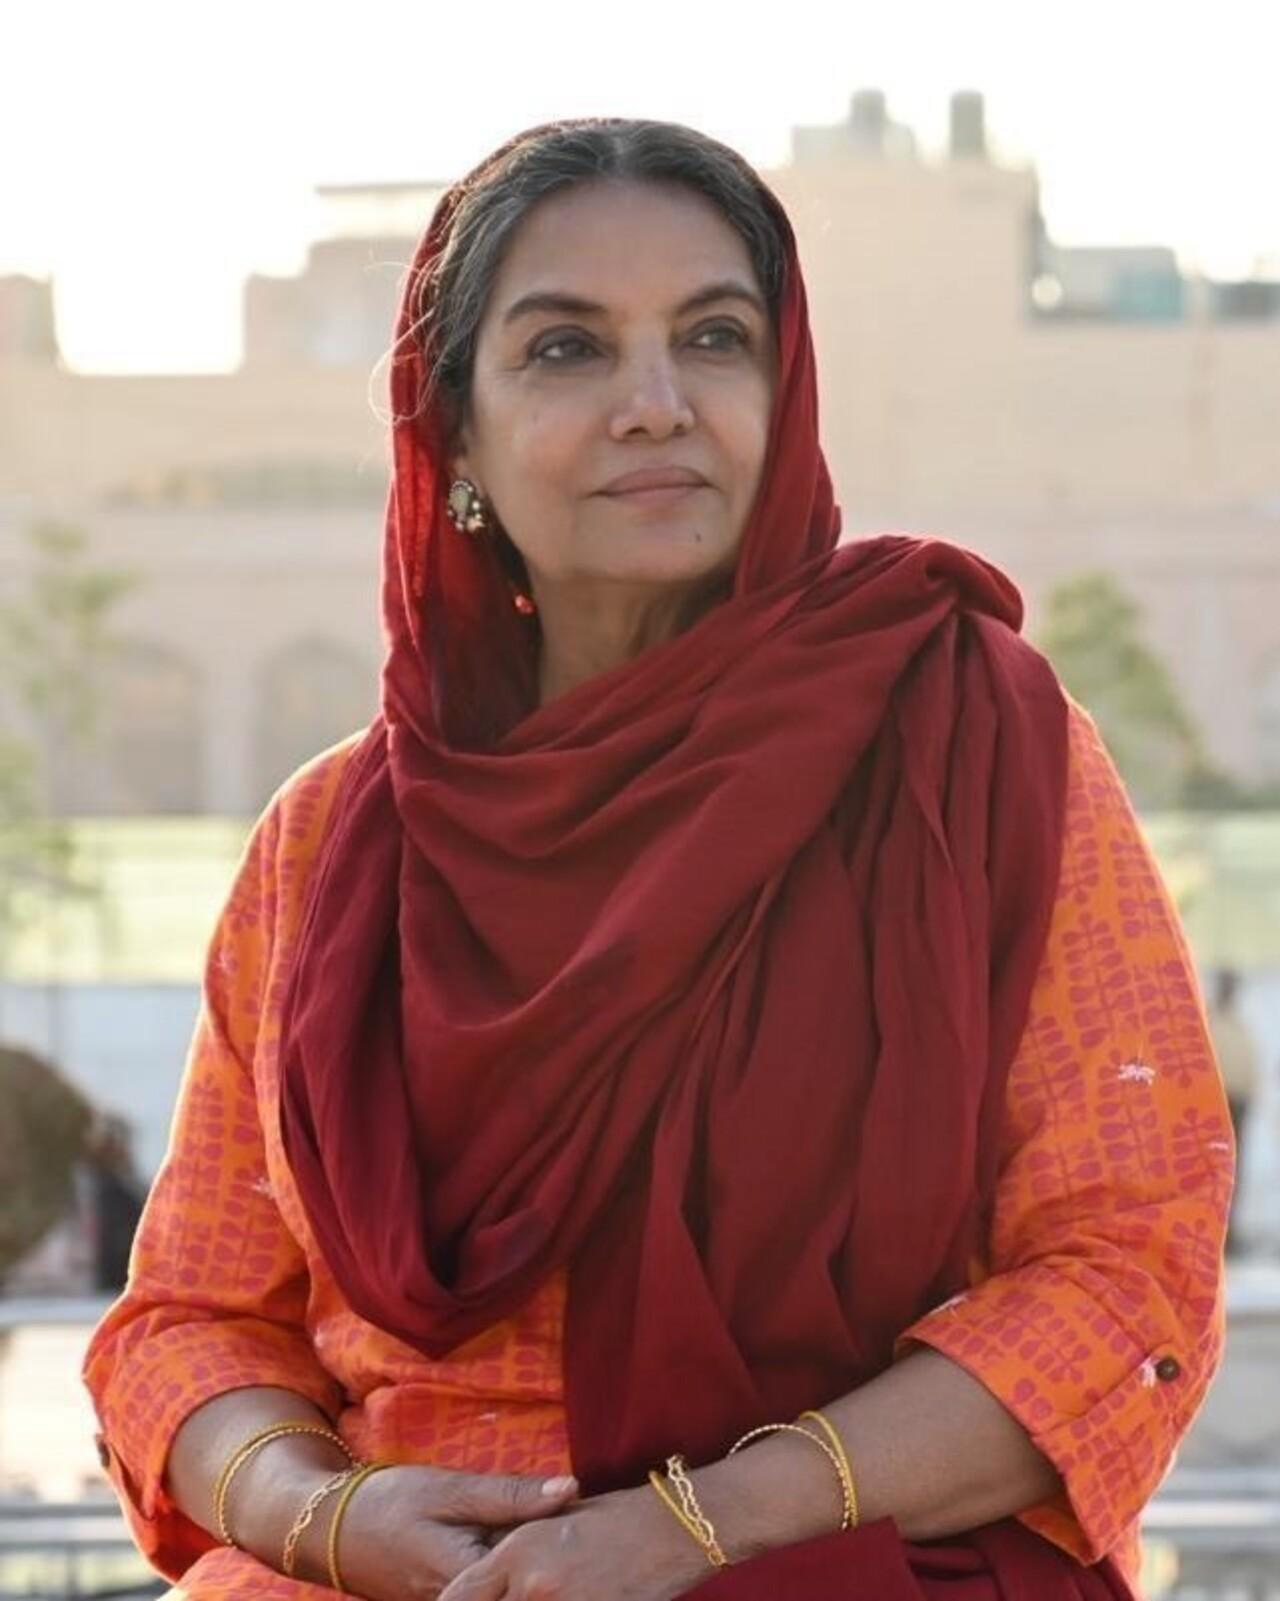 Shabana Azmi made her acting debut in 1974 with the film Ankur